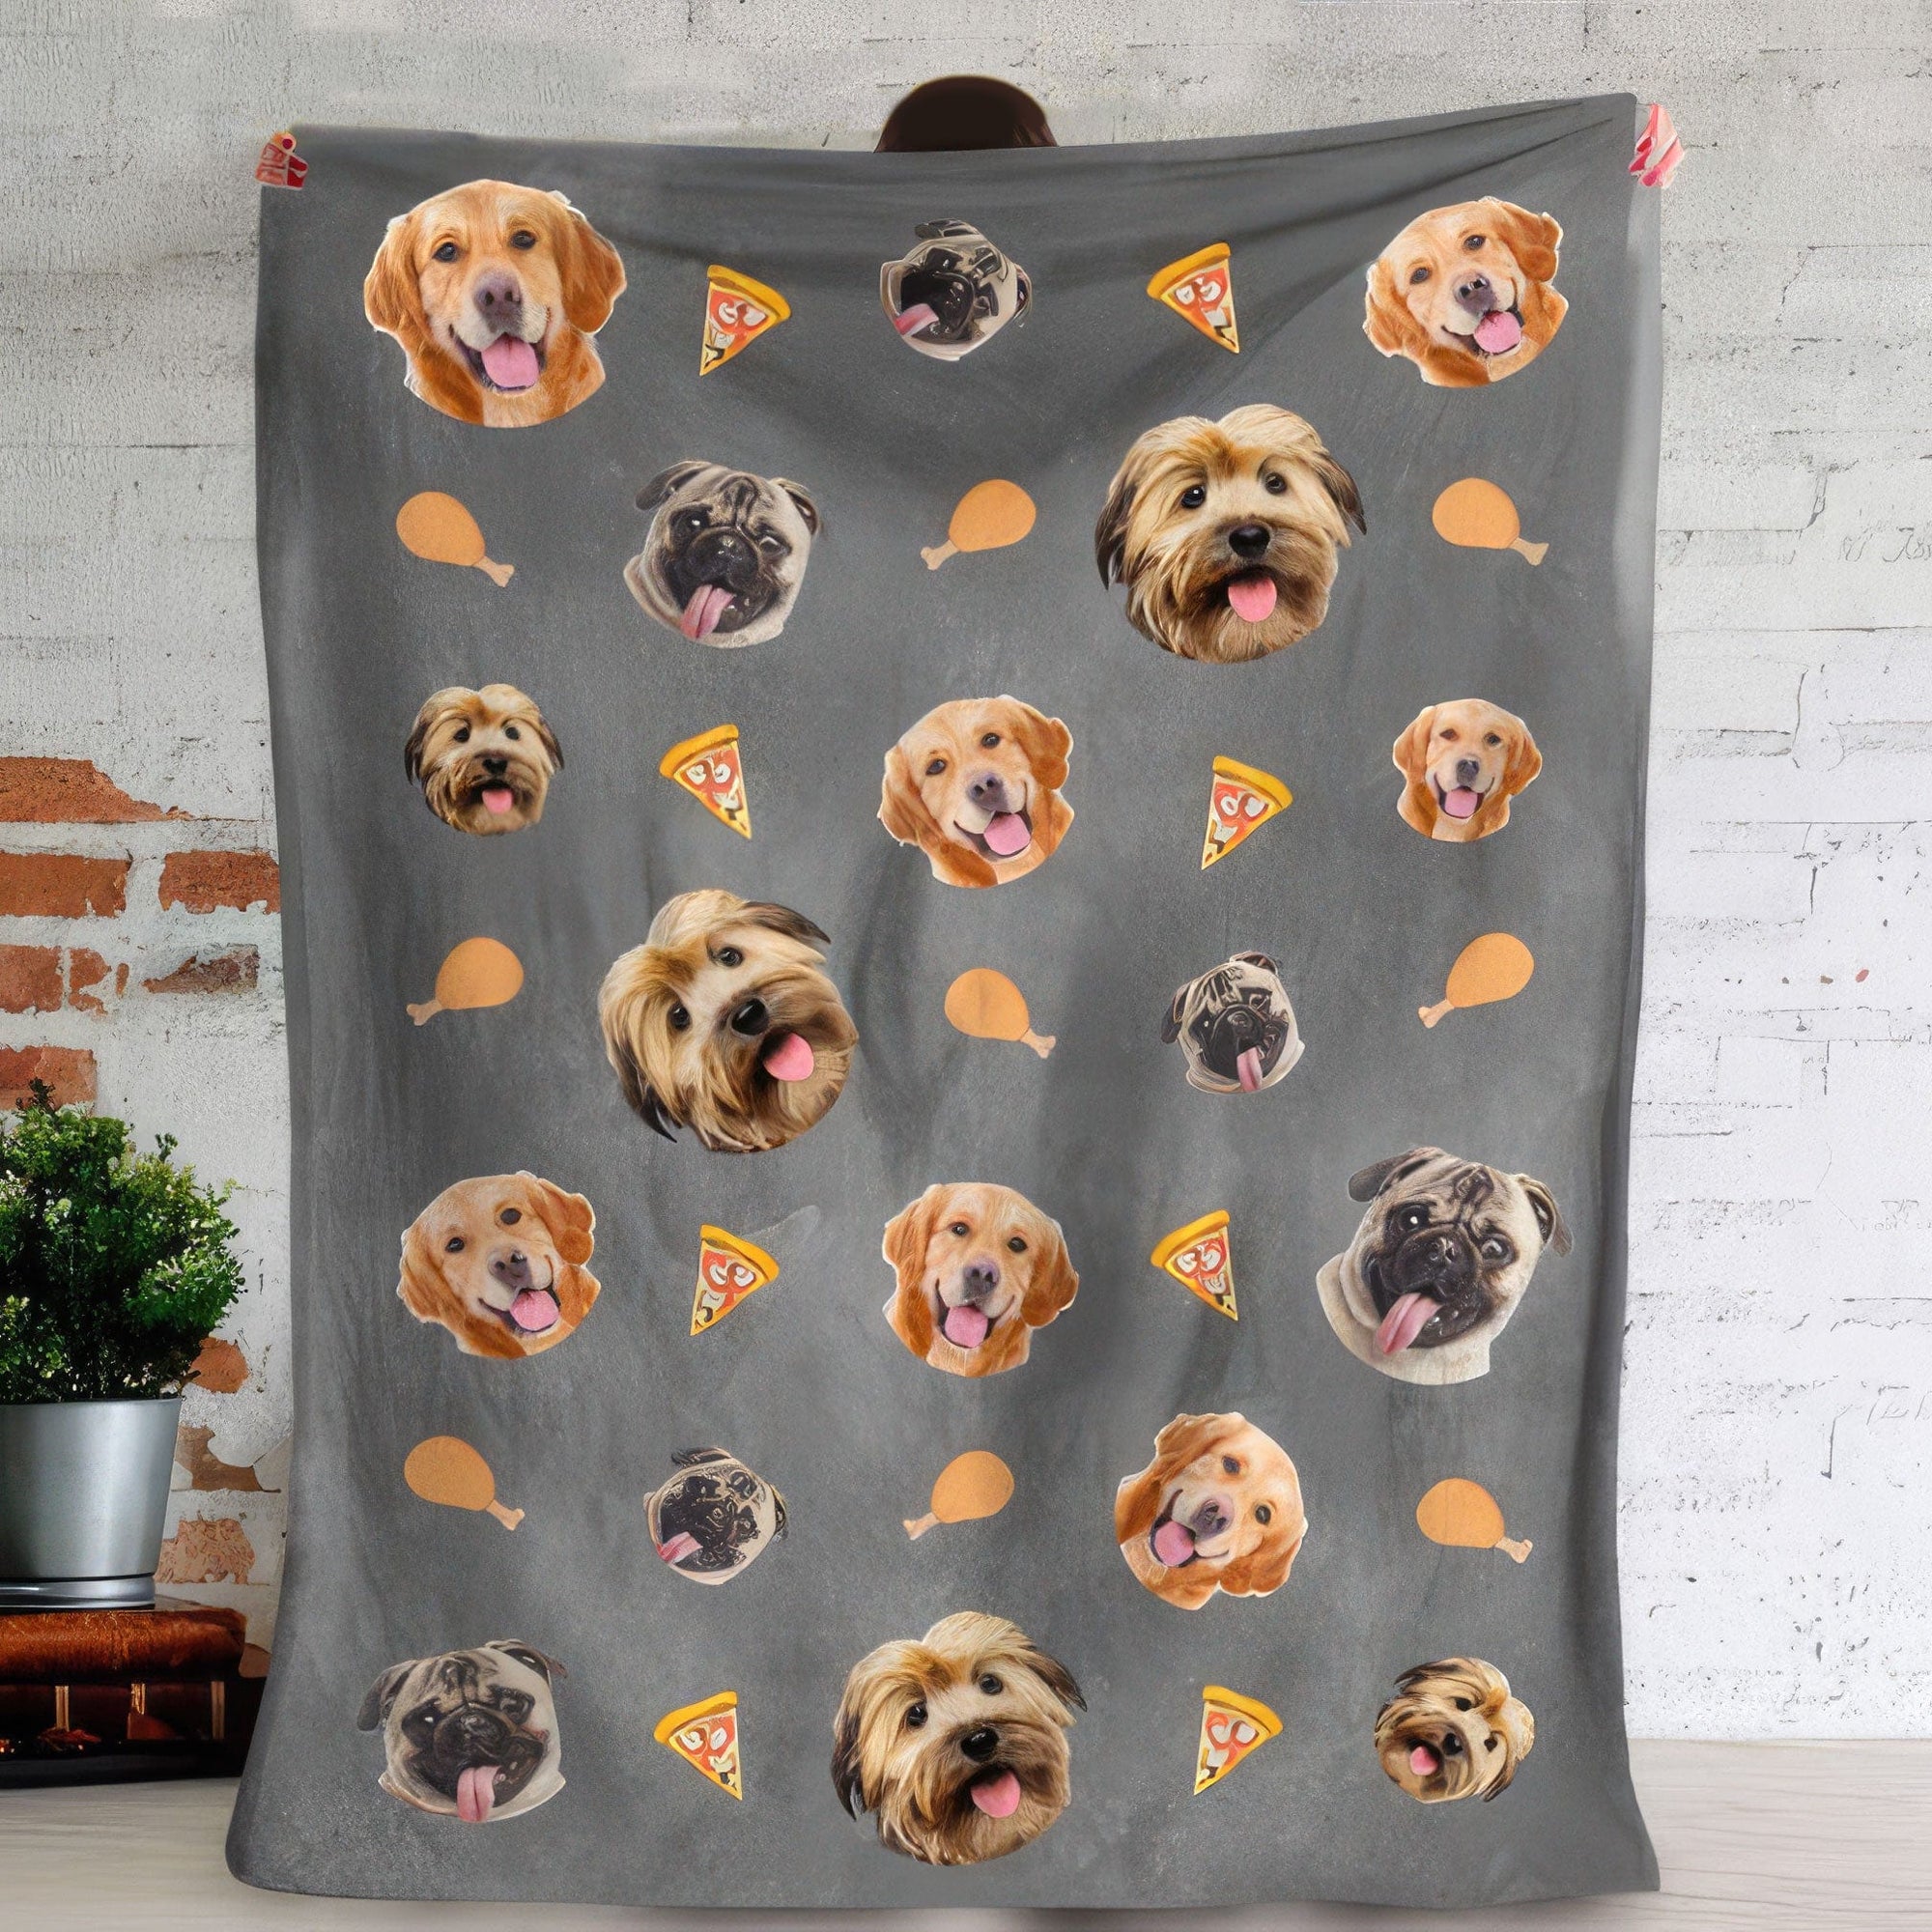 GeckoCustom Custom Pet Photo And Accessories Pattern Dog Cat Blanket T286 HN590 VPS Cozy Plush Fleece 30 x 40 Inches (baby size)